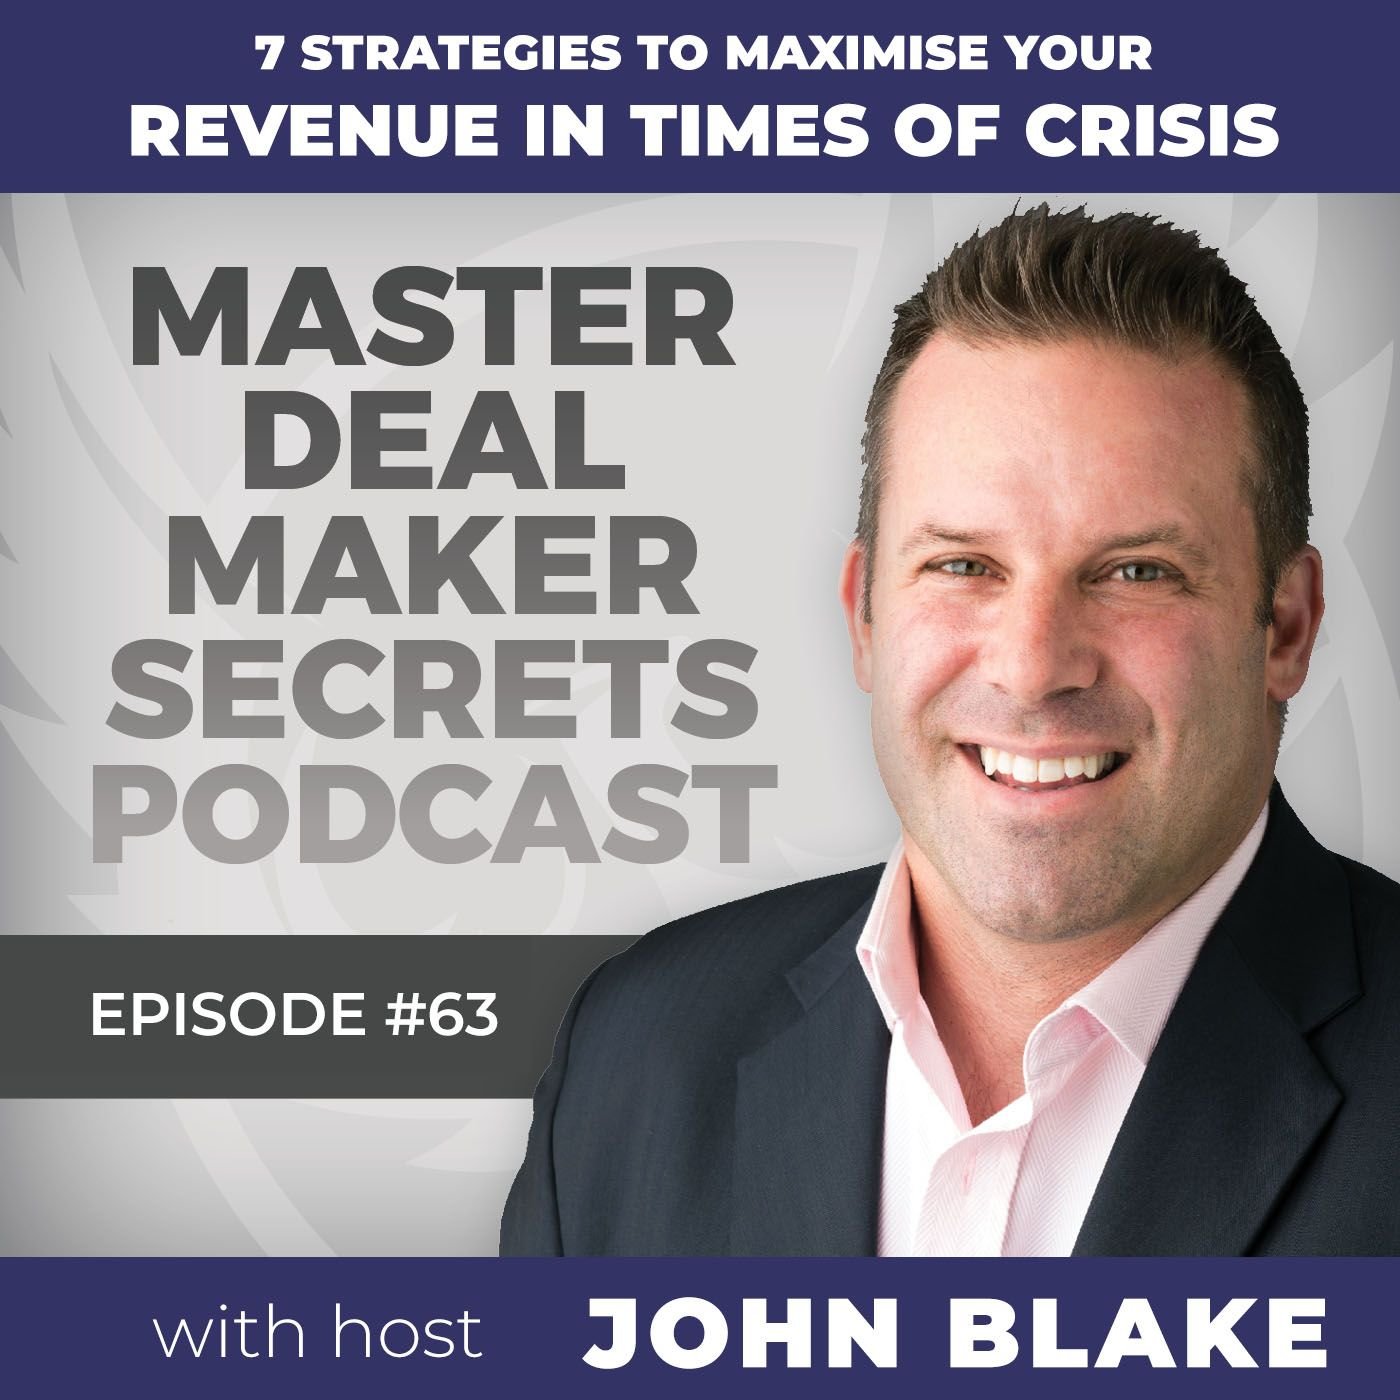 John Blake 7 Strategies to Maximise Your Revenue in Times of Crisis